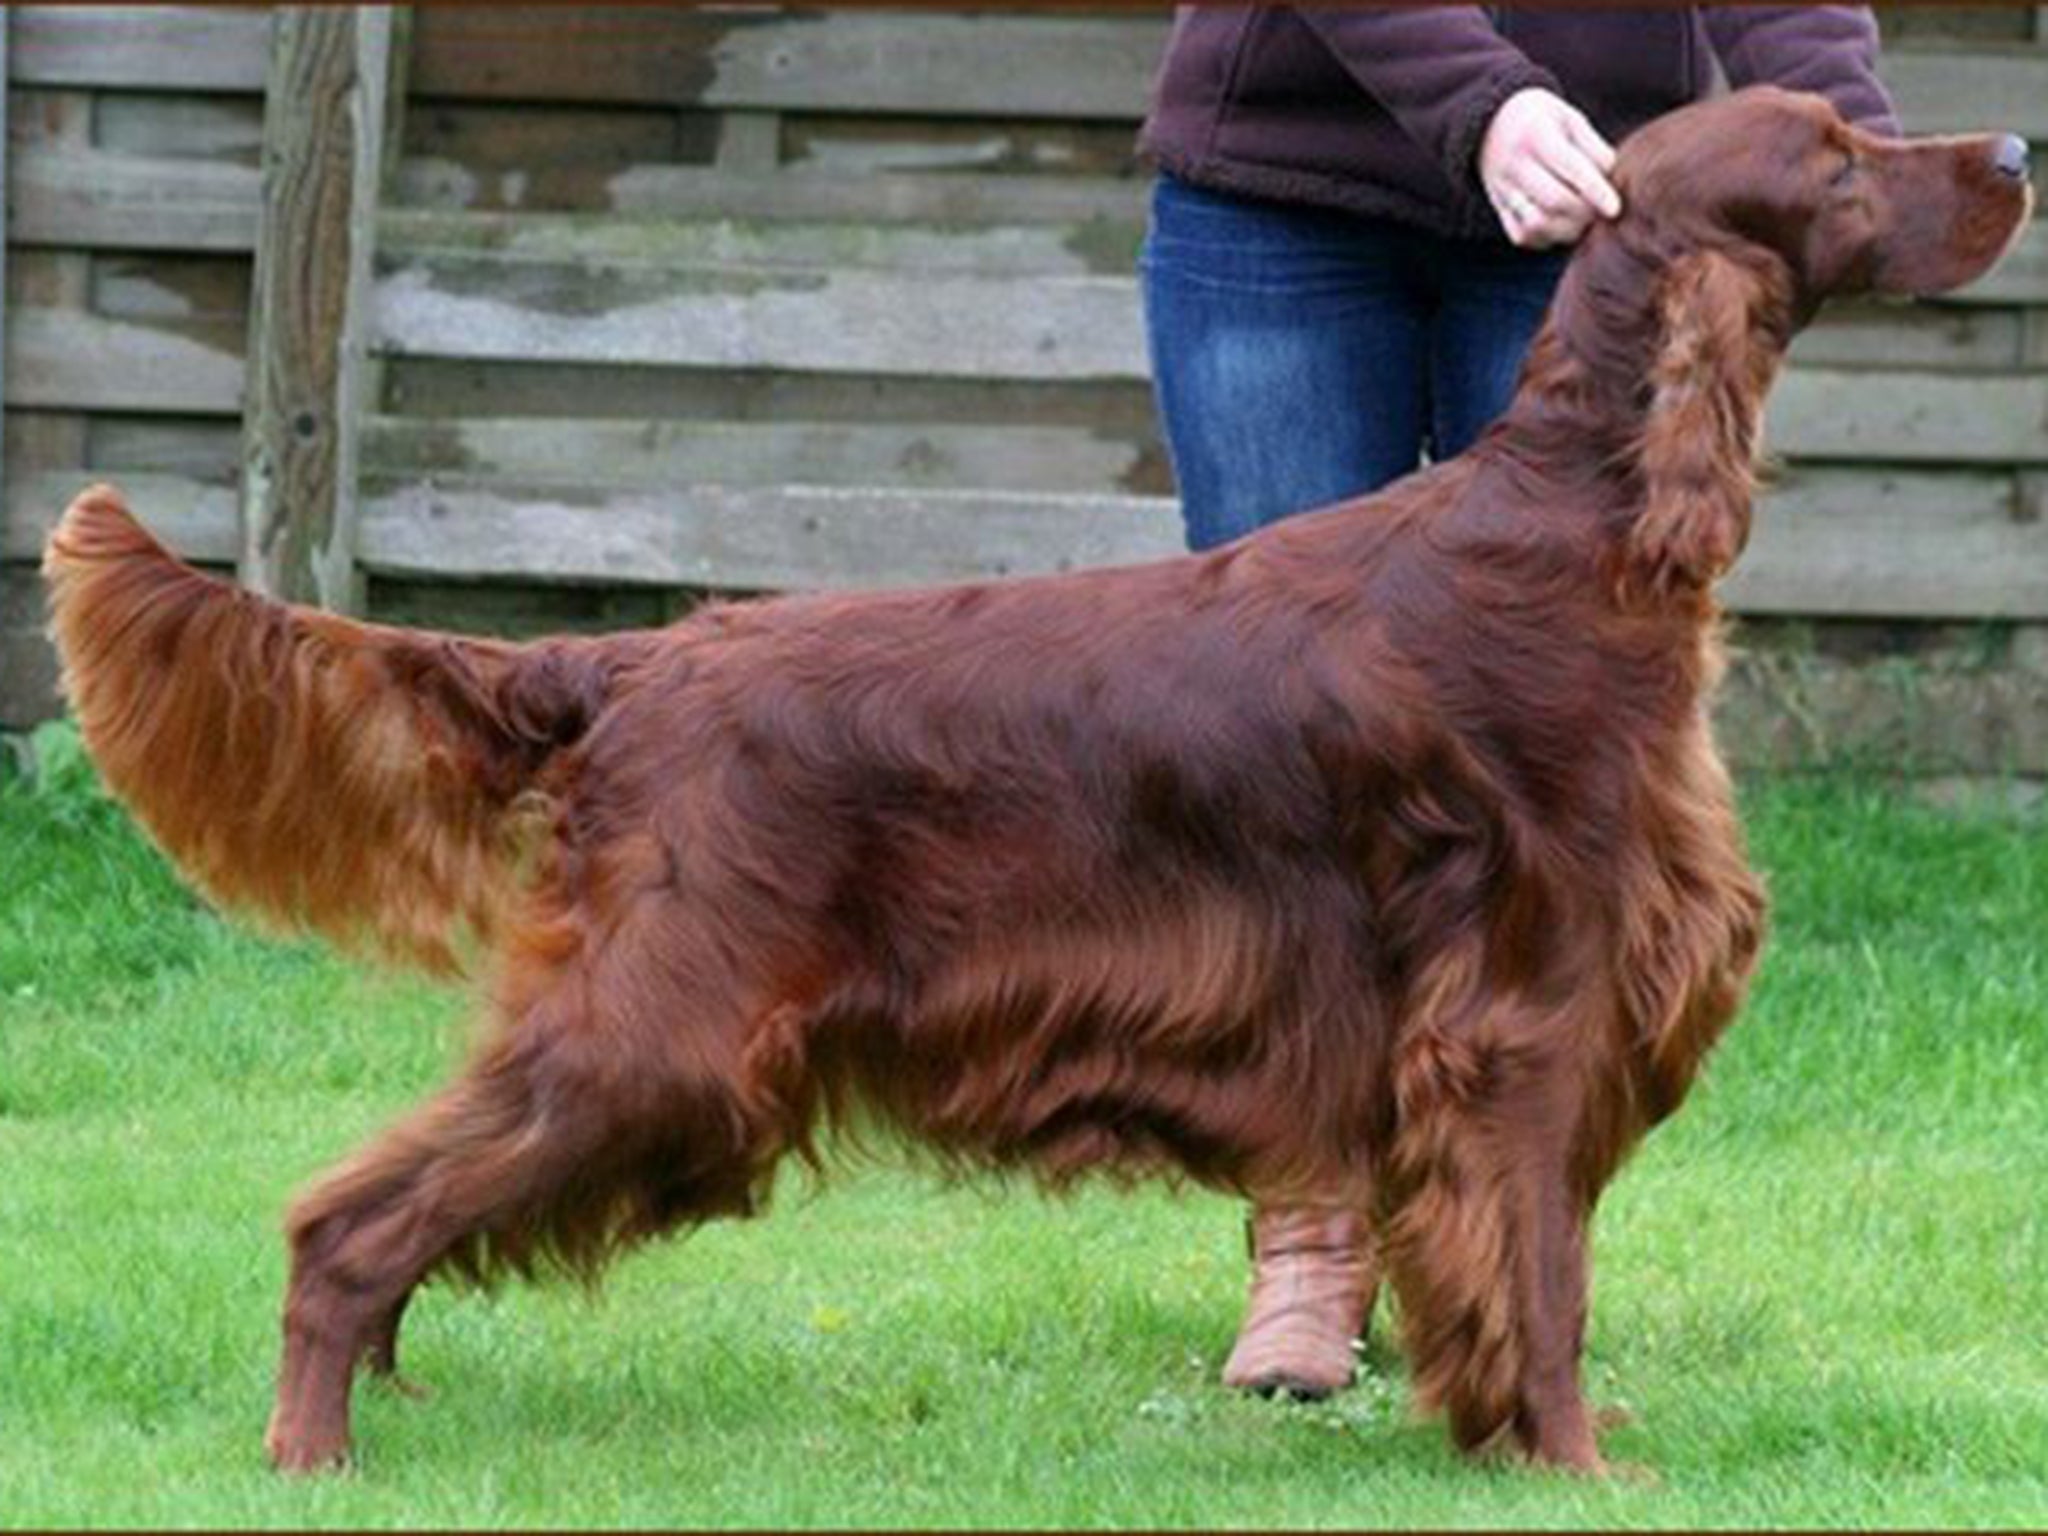 Jagger was a three-year-old Irish Setter, whose show name was Thendara Satisfaction